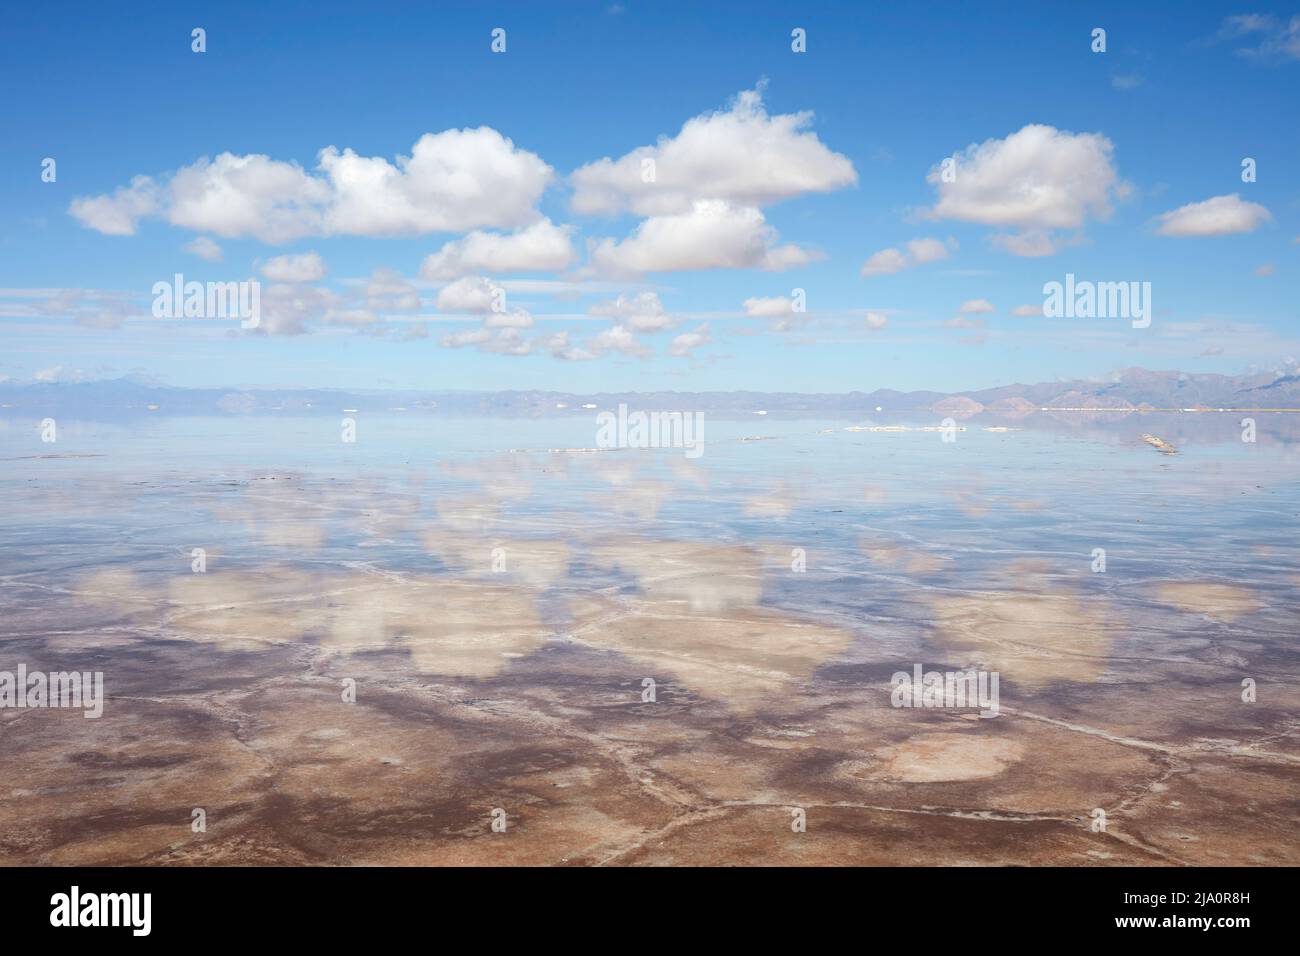 The landscape of the 'Salinas Grandes' salt flat at 3450 mt of altitude, during the rainy season, Jujuy province, Argentina. Stock Photo